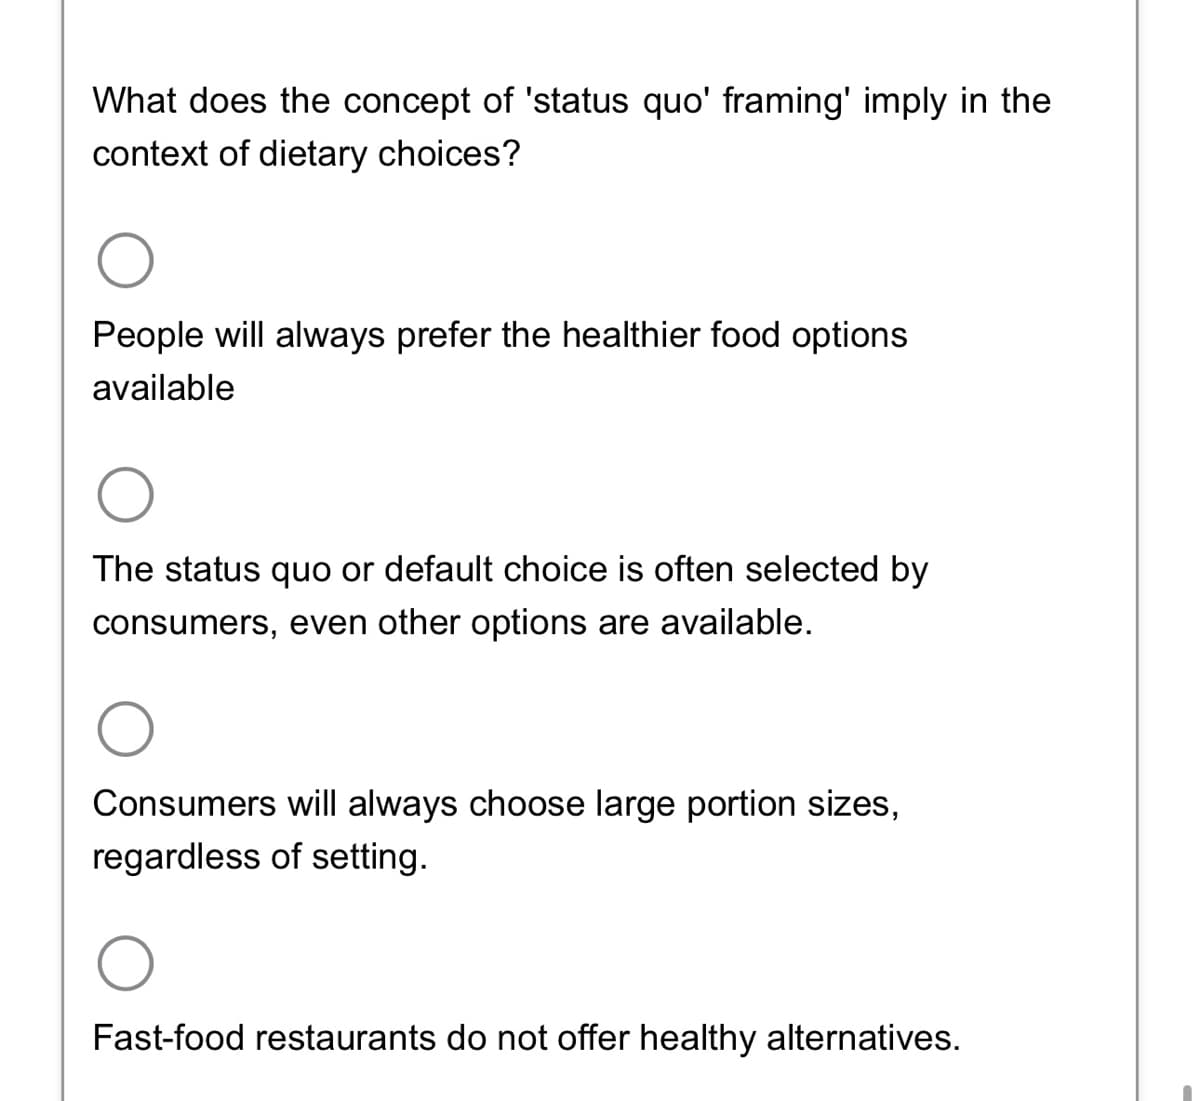 What does the concept of 'status quo' framing' imply in the
context of dietary choices?
O
People will always prefer the healthier food options
available
The status quo or default choice is often selected by
consumers, even other options are available.
Consumers will always choose large portion sizes,
regardless of setting.
Fast-food restaurants do not offer healthy alternatives.